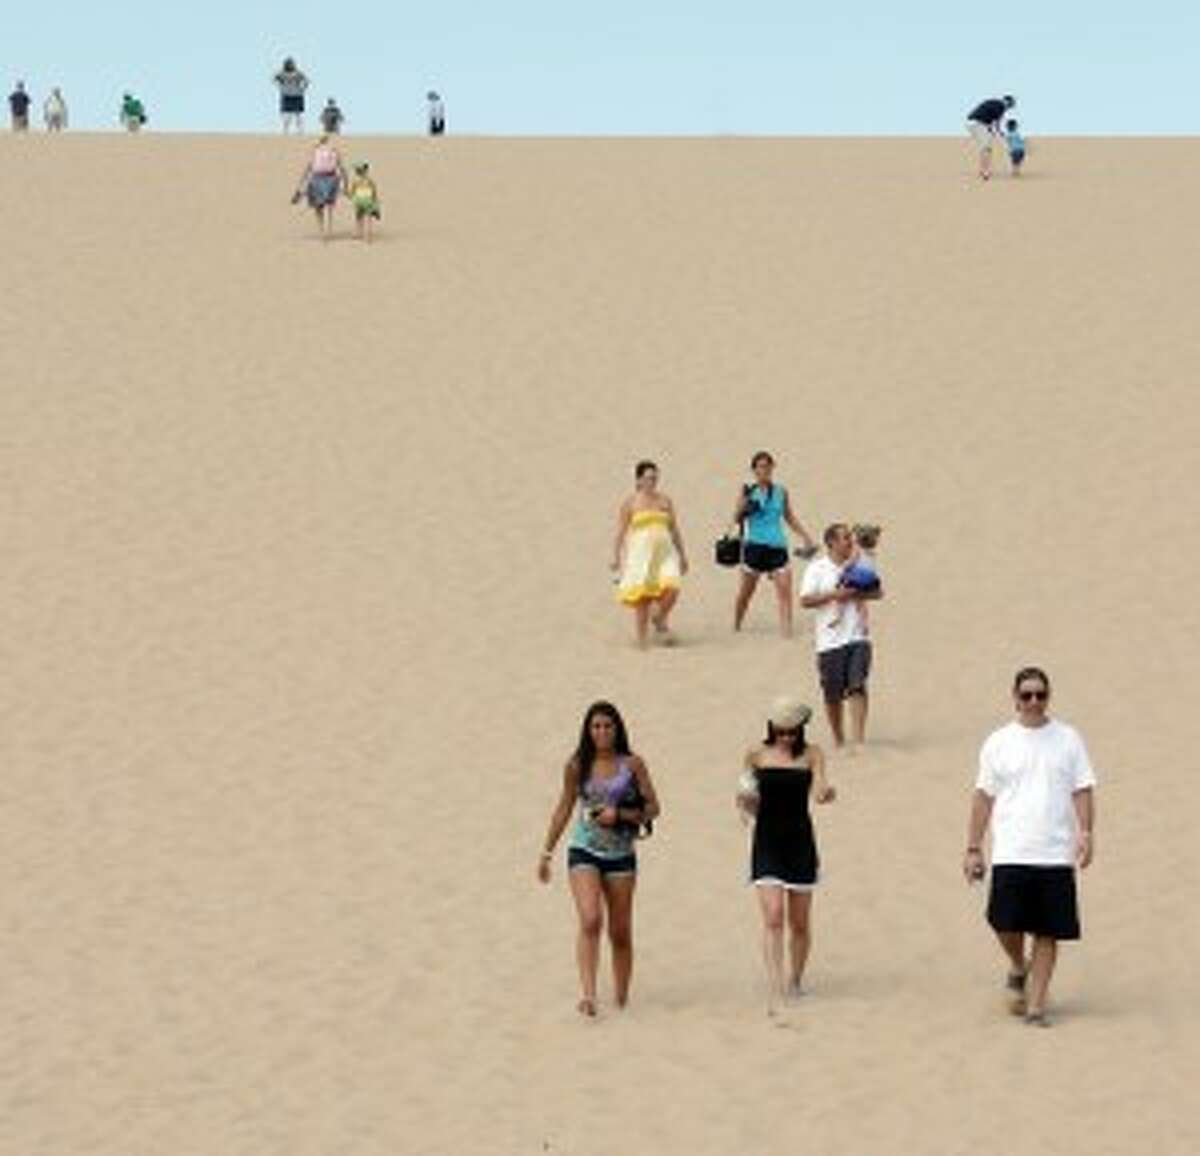 TOURISM: The Sleeping Bear Sand Dunes saw increased traffic, as did many of the surrounding cities and villages. Crystal Mountain Resort and Spa in Tompsonville, as well as Vacation Trailer Park in Benzonia reported increased occupancy over the summer. (Photo/Roland Halliday)